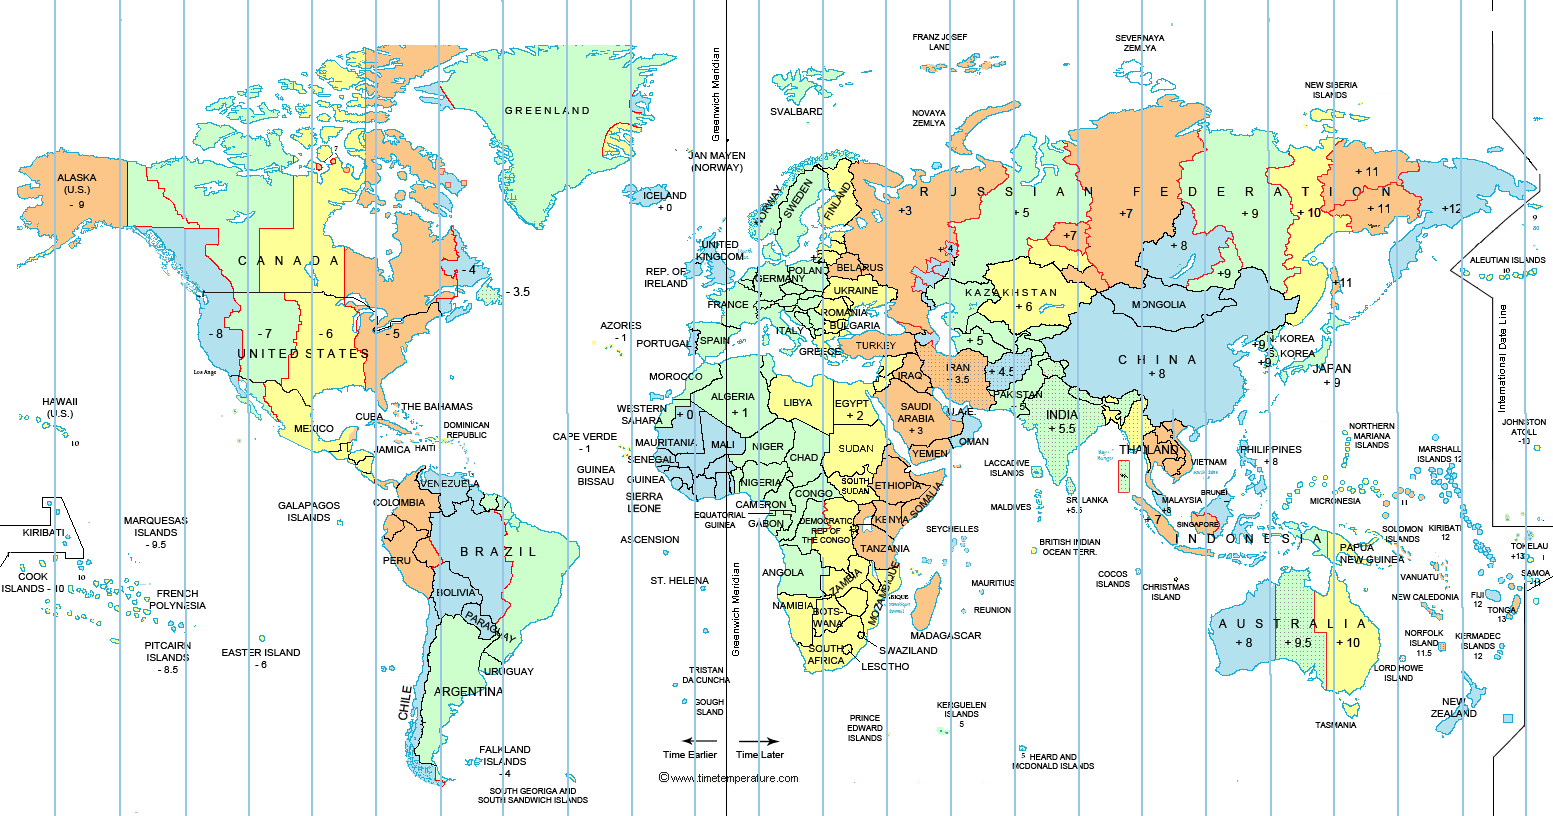 Large World Time Zone Map